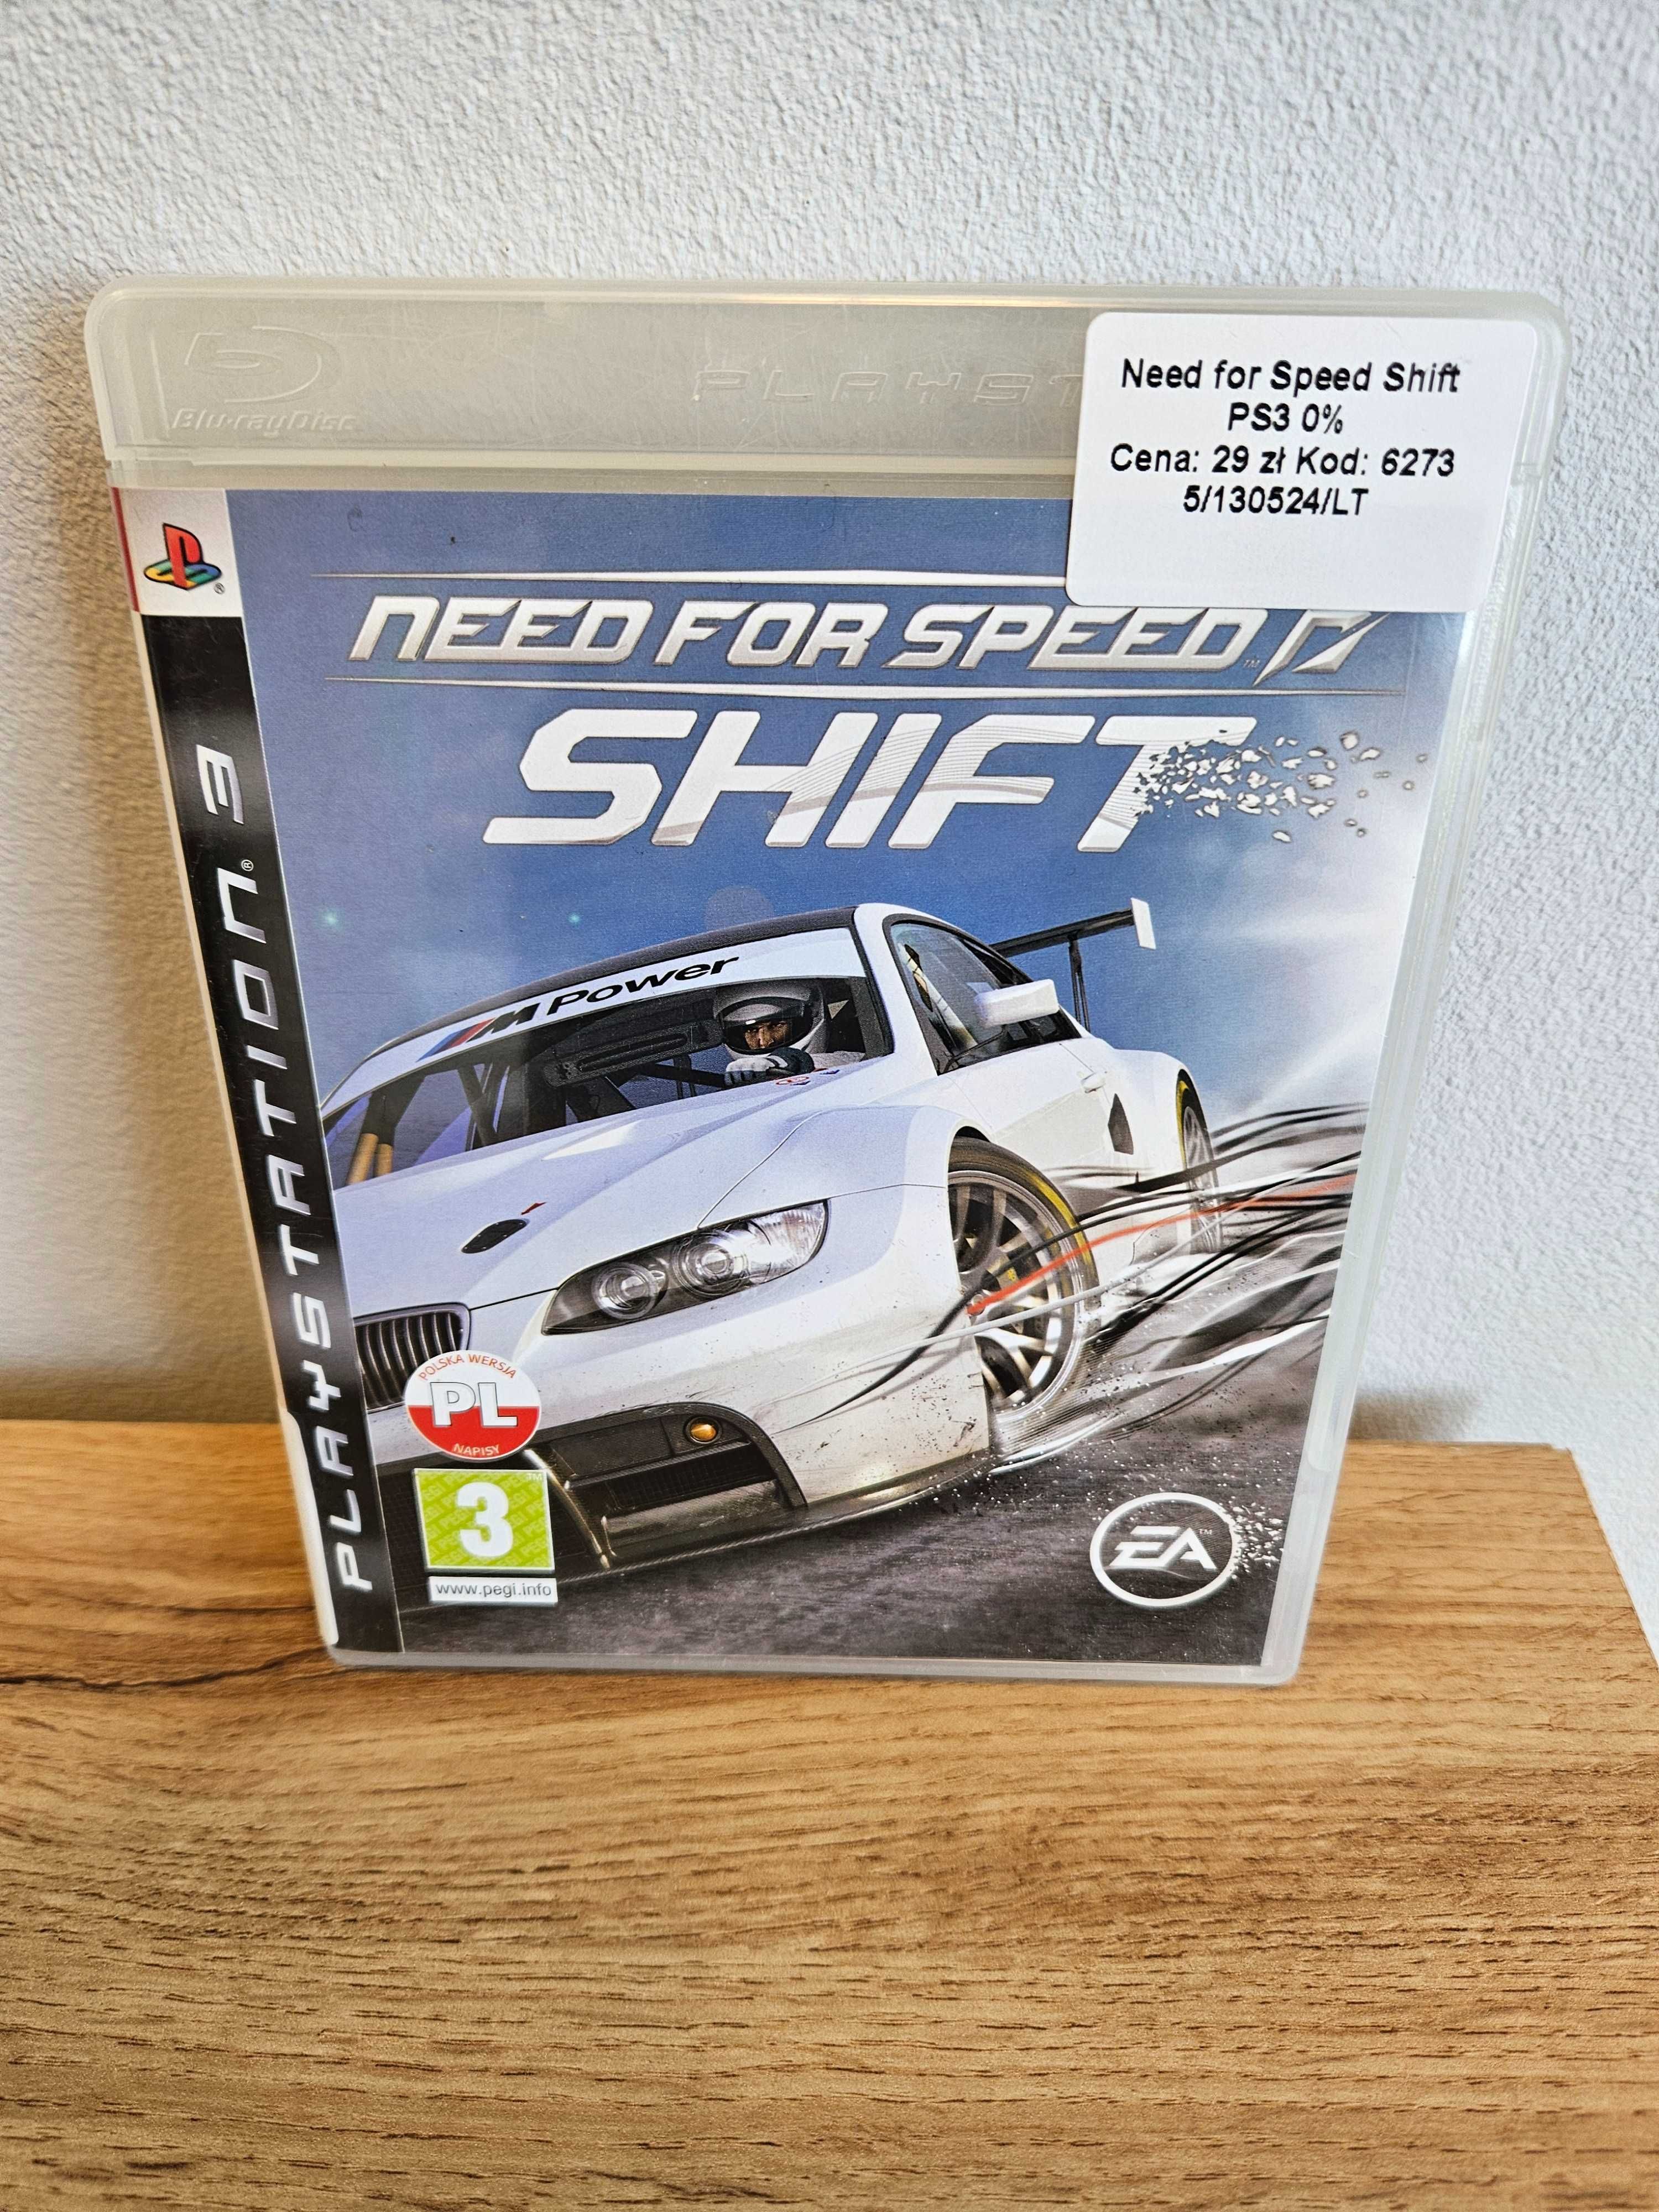 Need for Speed Shift PlayStation 3 As Game & GSM 6273